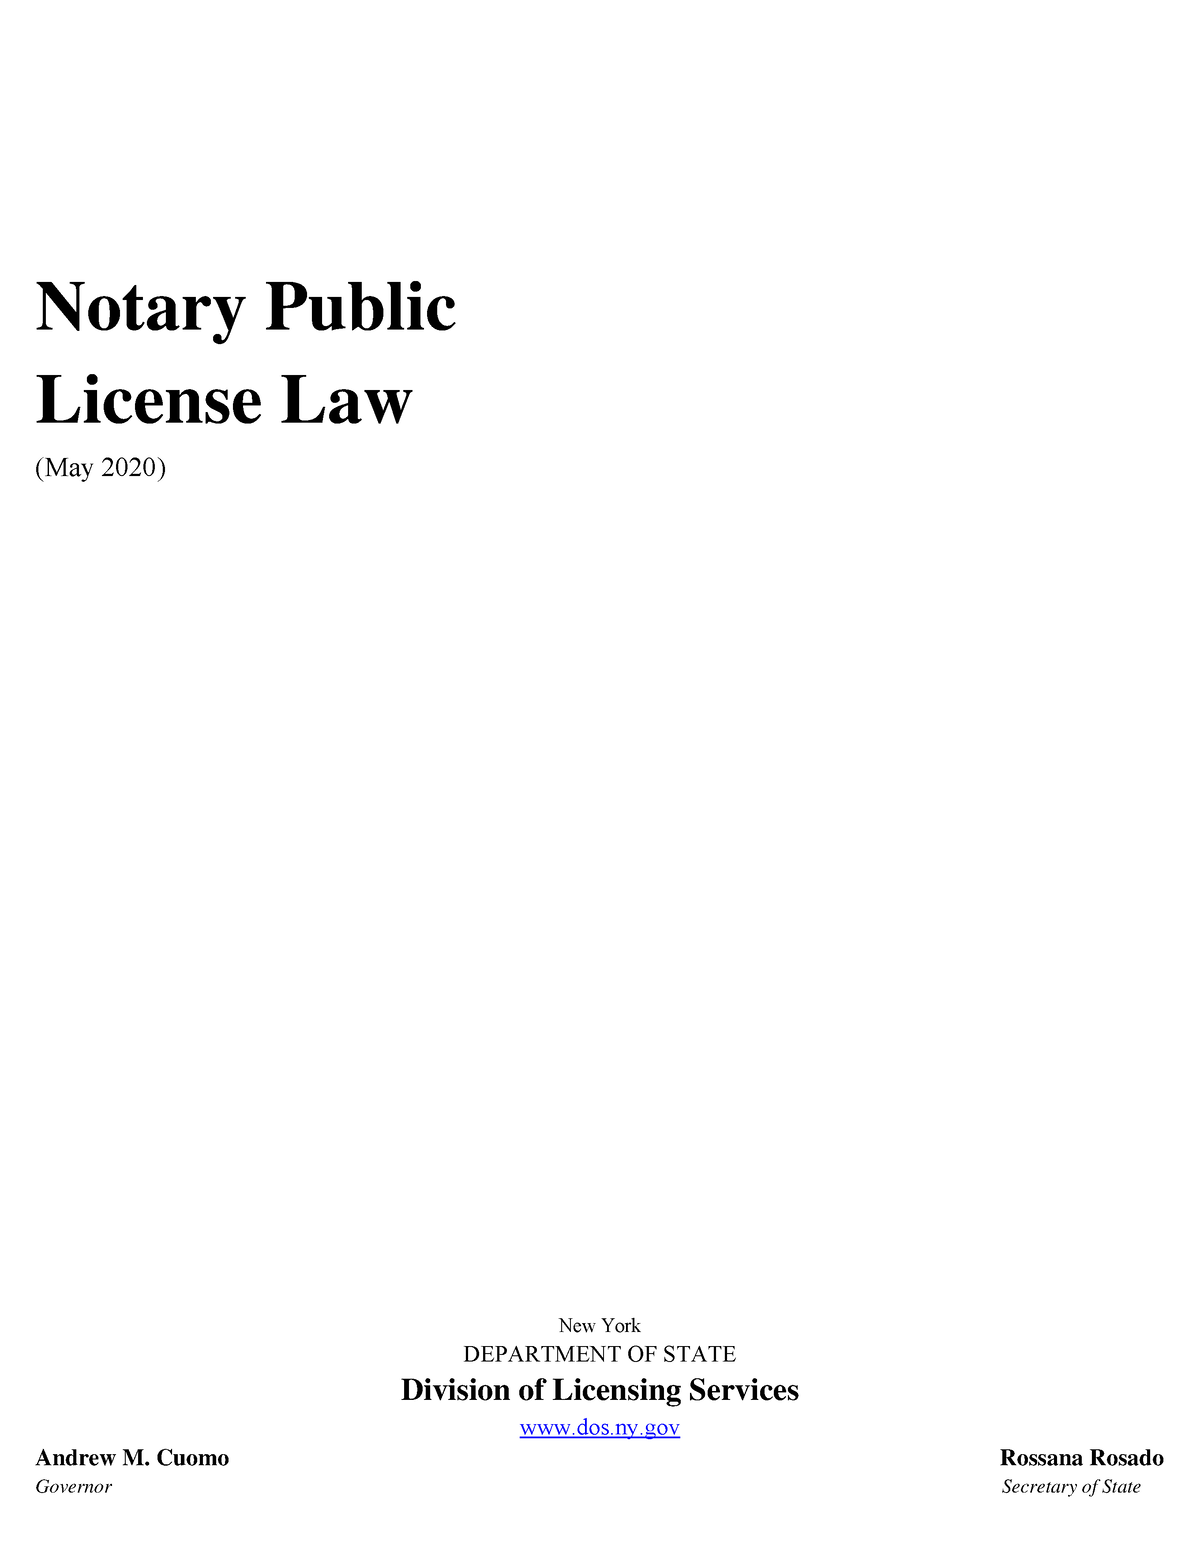 Notary Public Study guide Notary Public License Law (May 2020) New